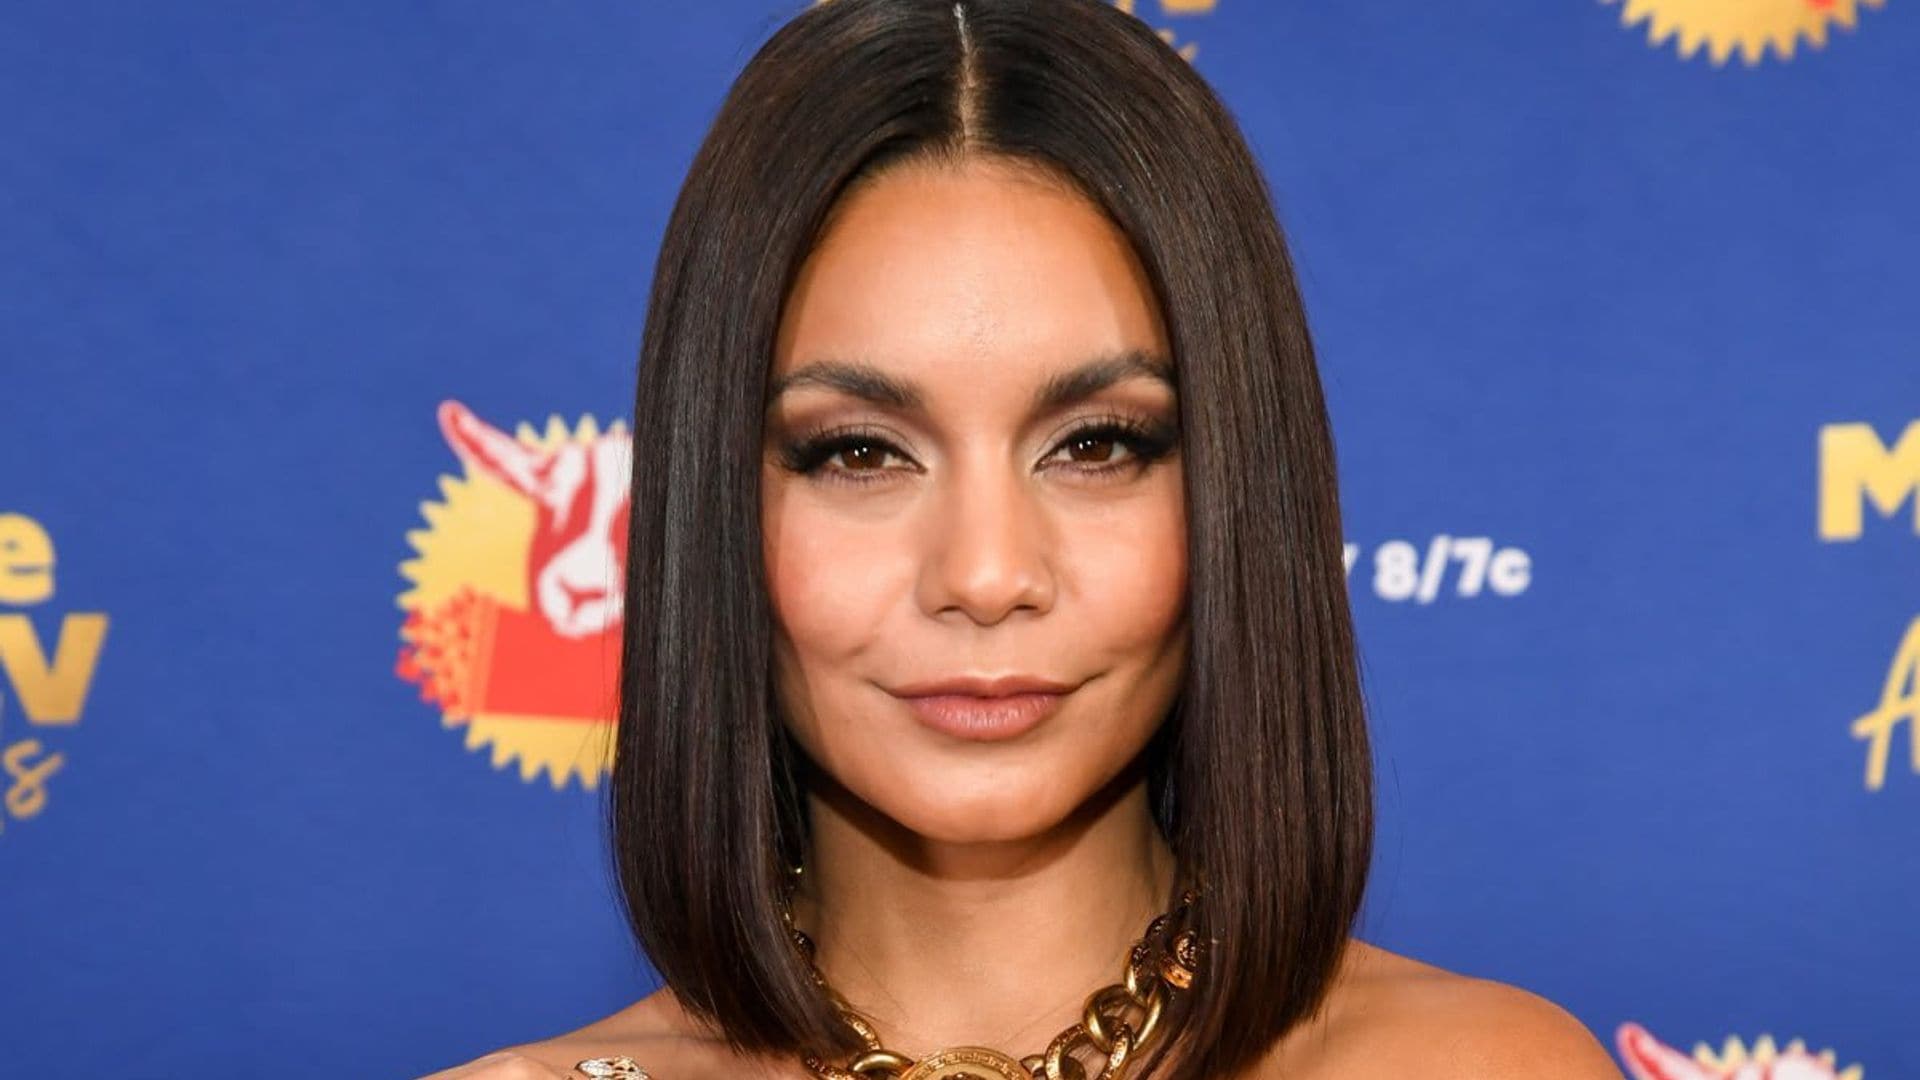 Vanessa Hudgens got a boa constrictor snake tattoo while in NYC promoting her new film